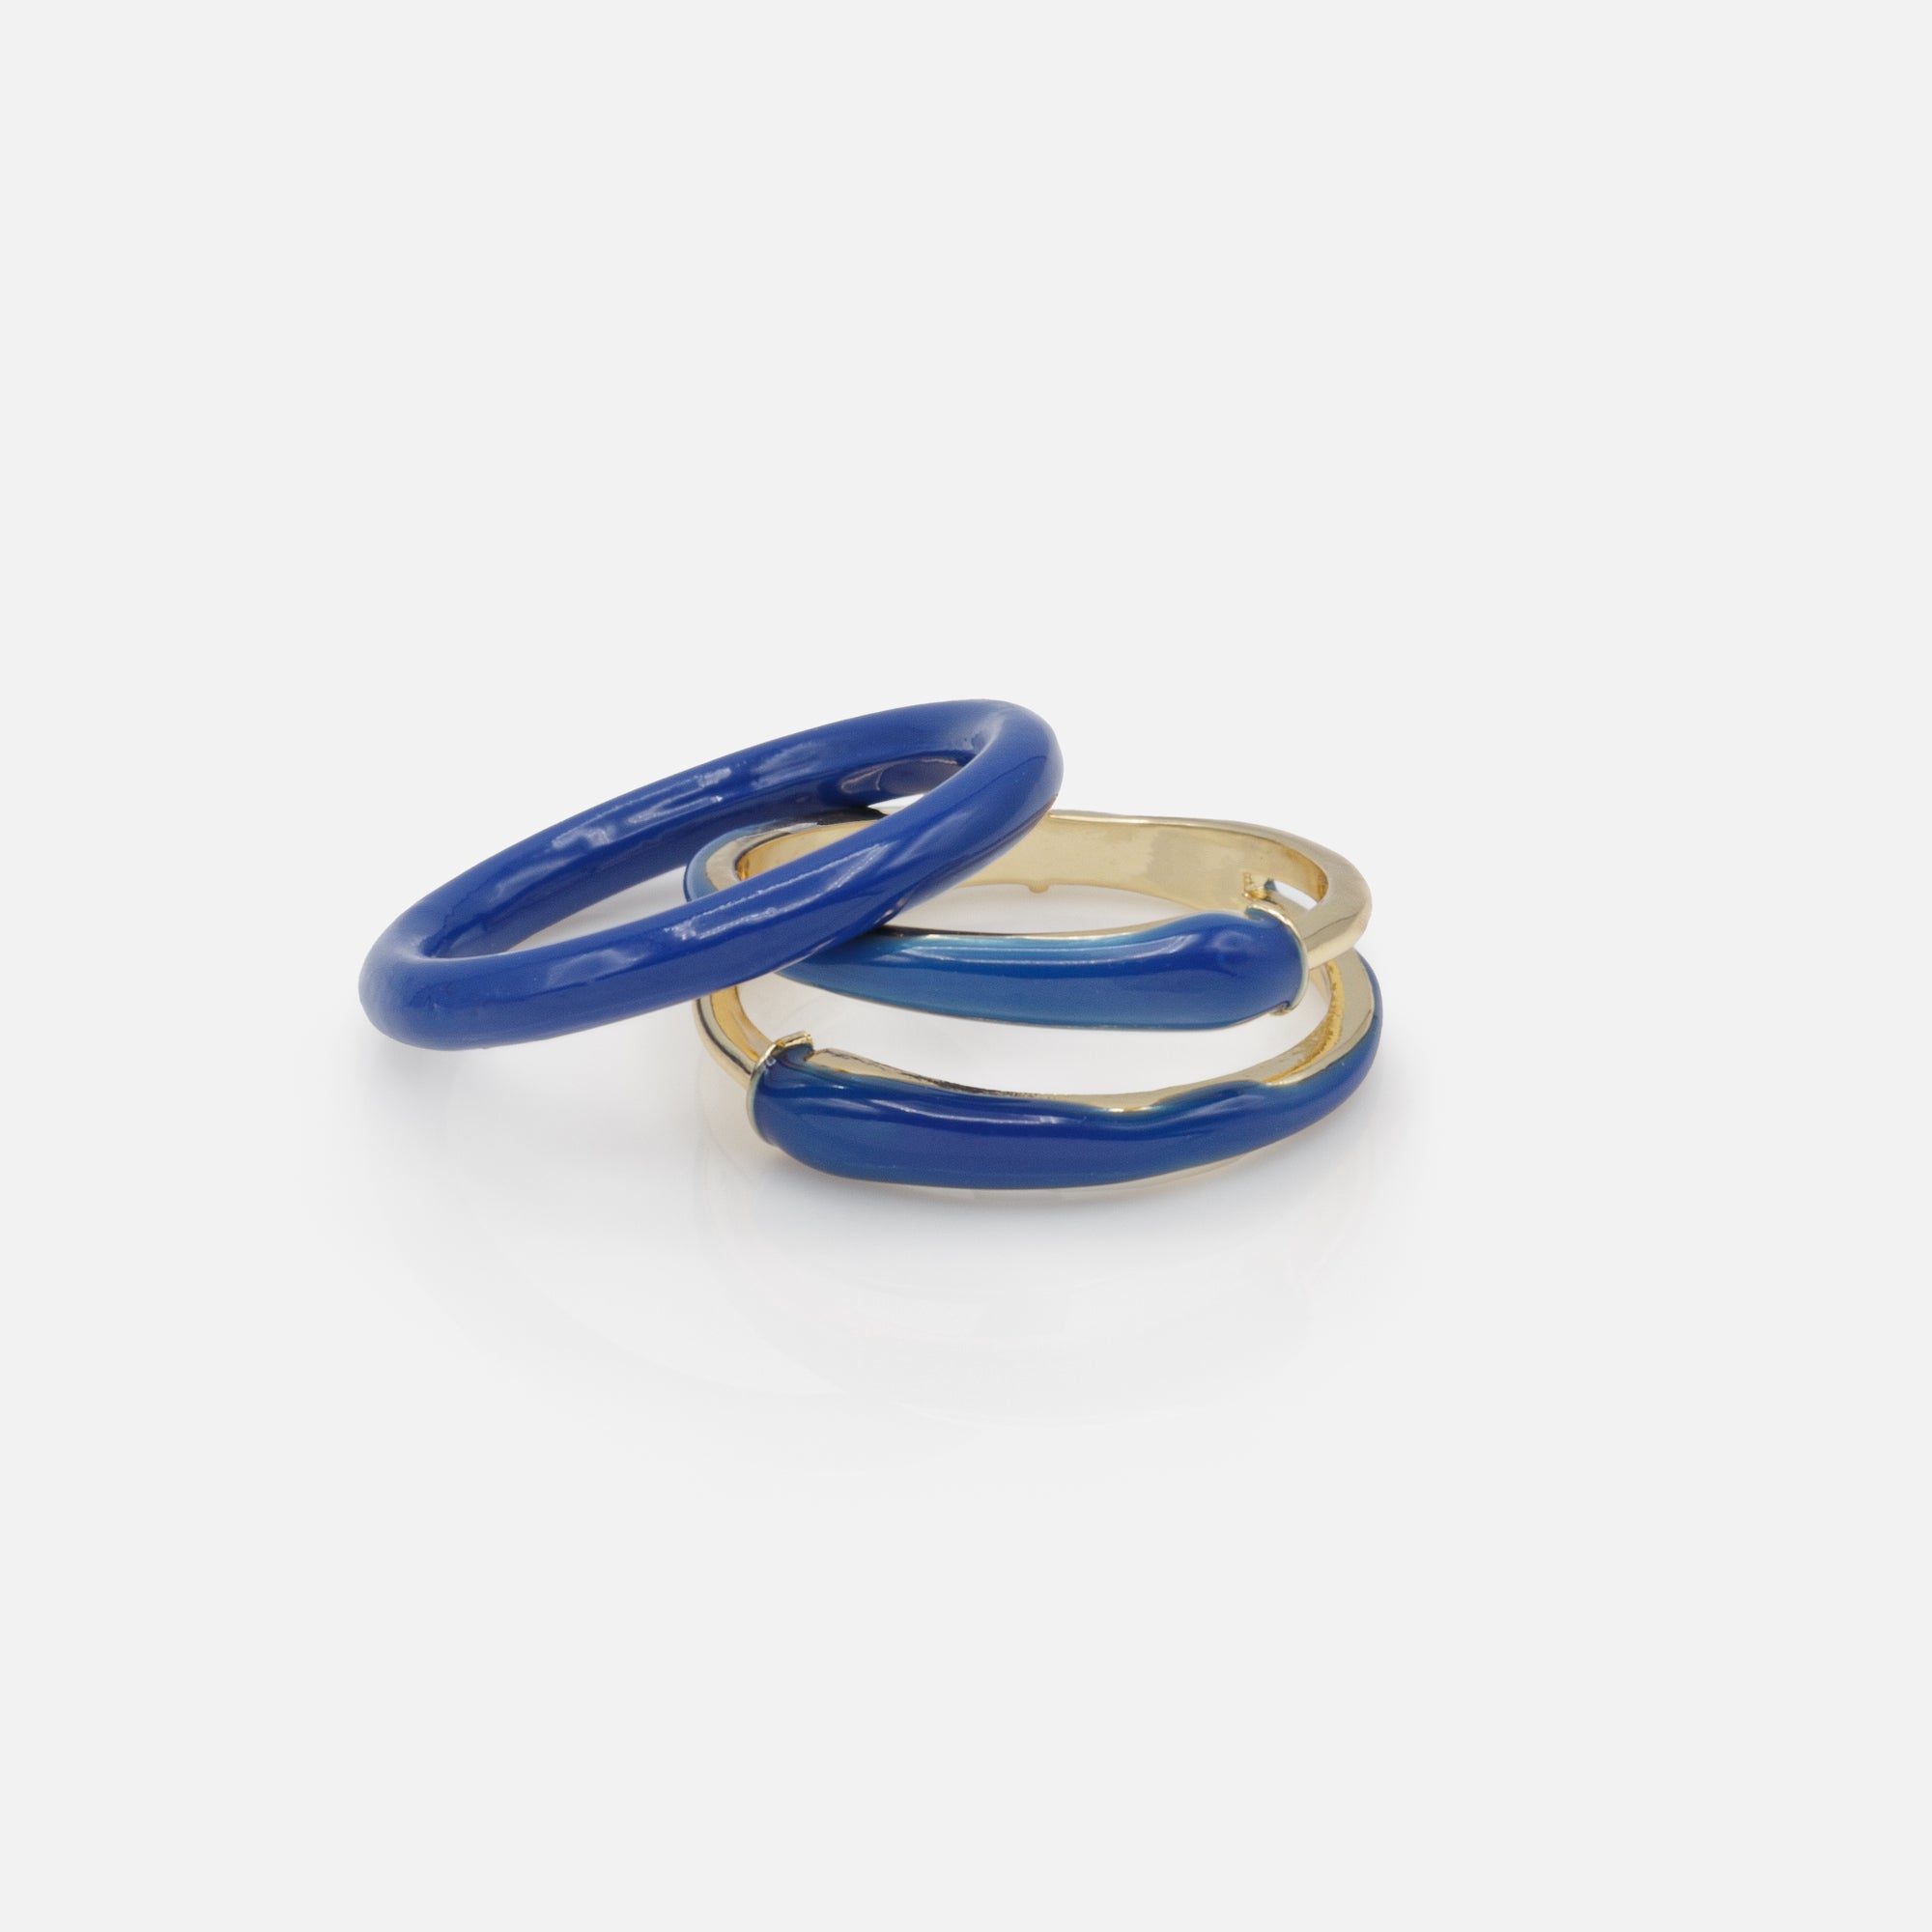 Duo of gold and navy rings